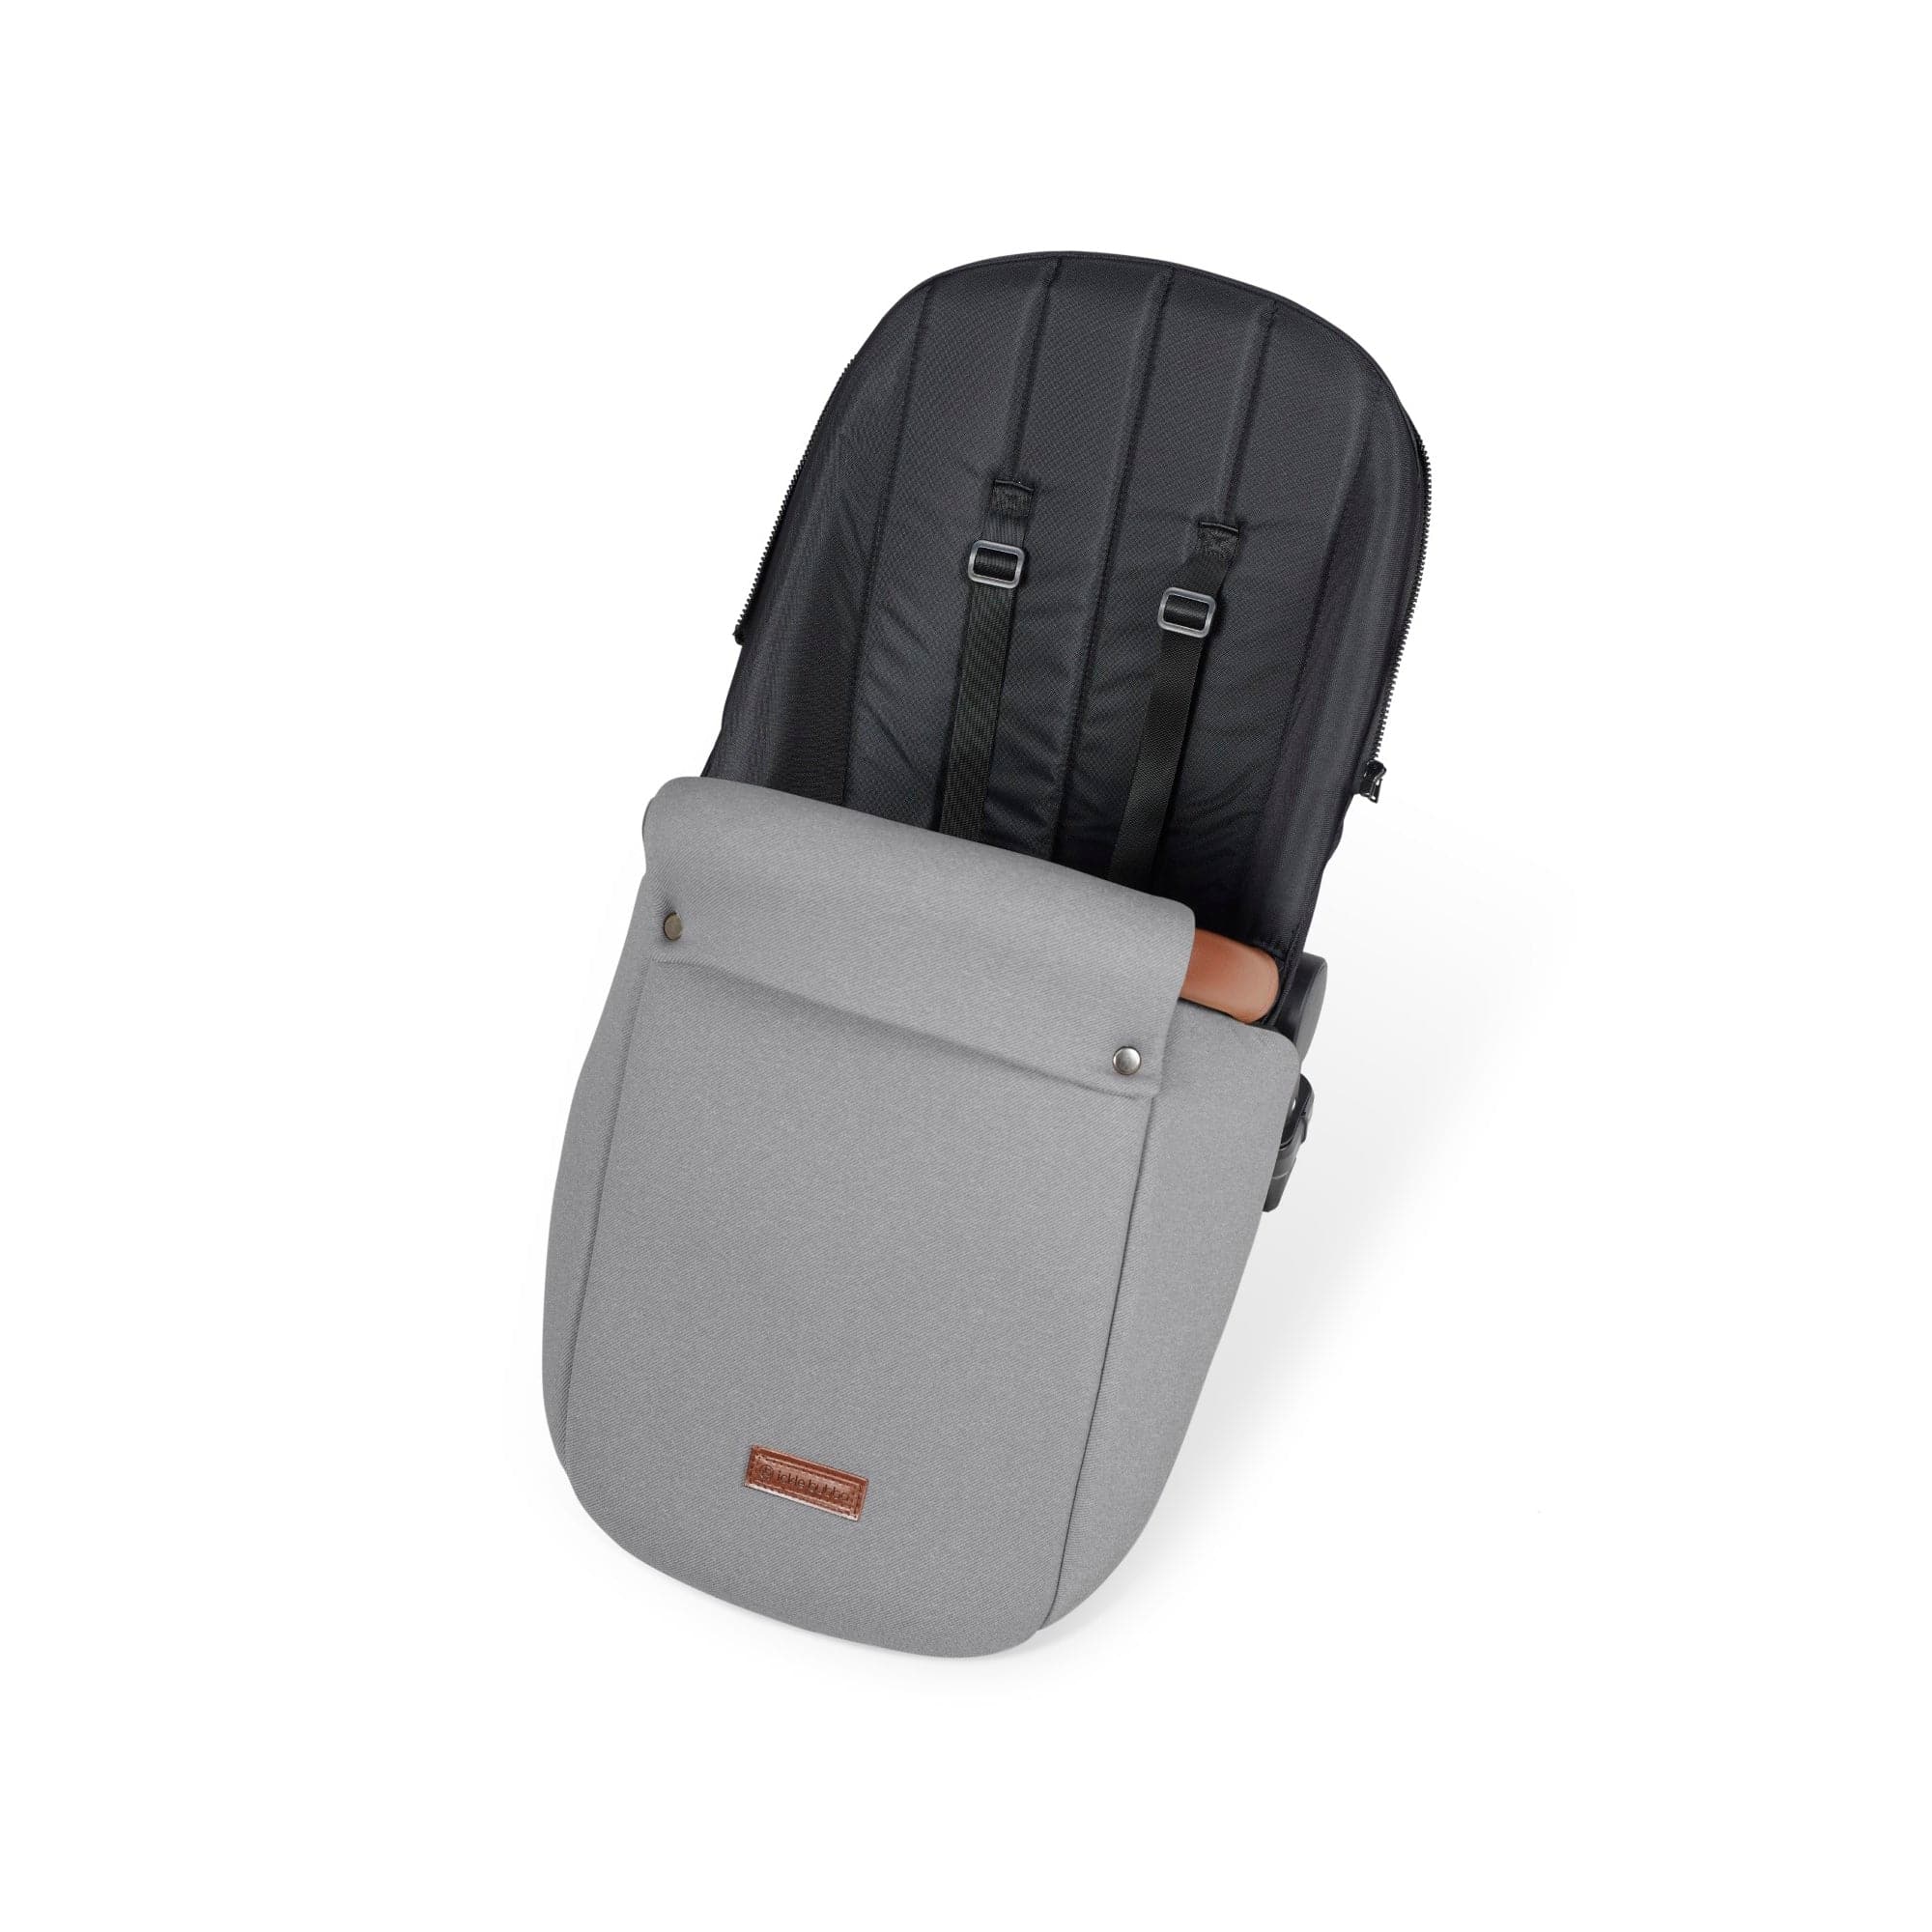 Ickle Bubba Stomp Luxe All-in-One I-Size Travel System With Isofix Base - Silver / Pearl Grey / Tan -  | For Your Little One